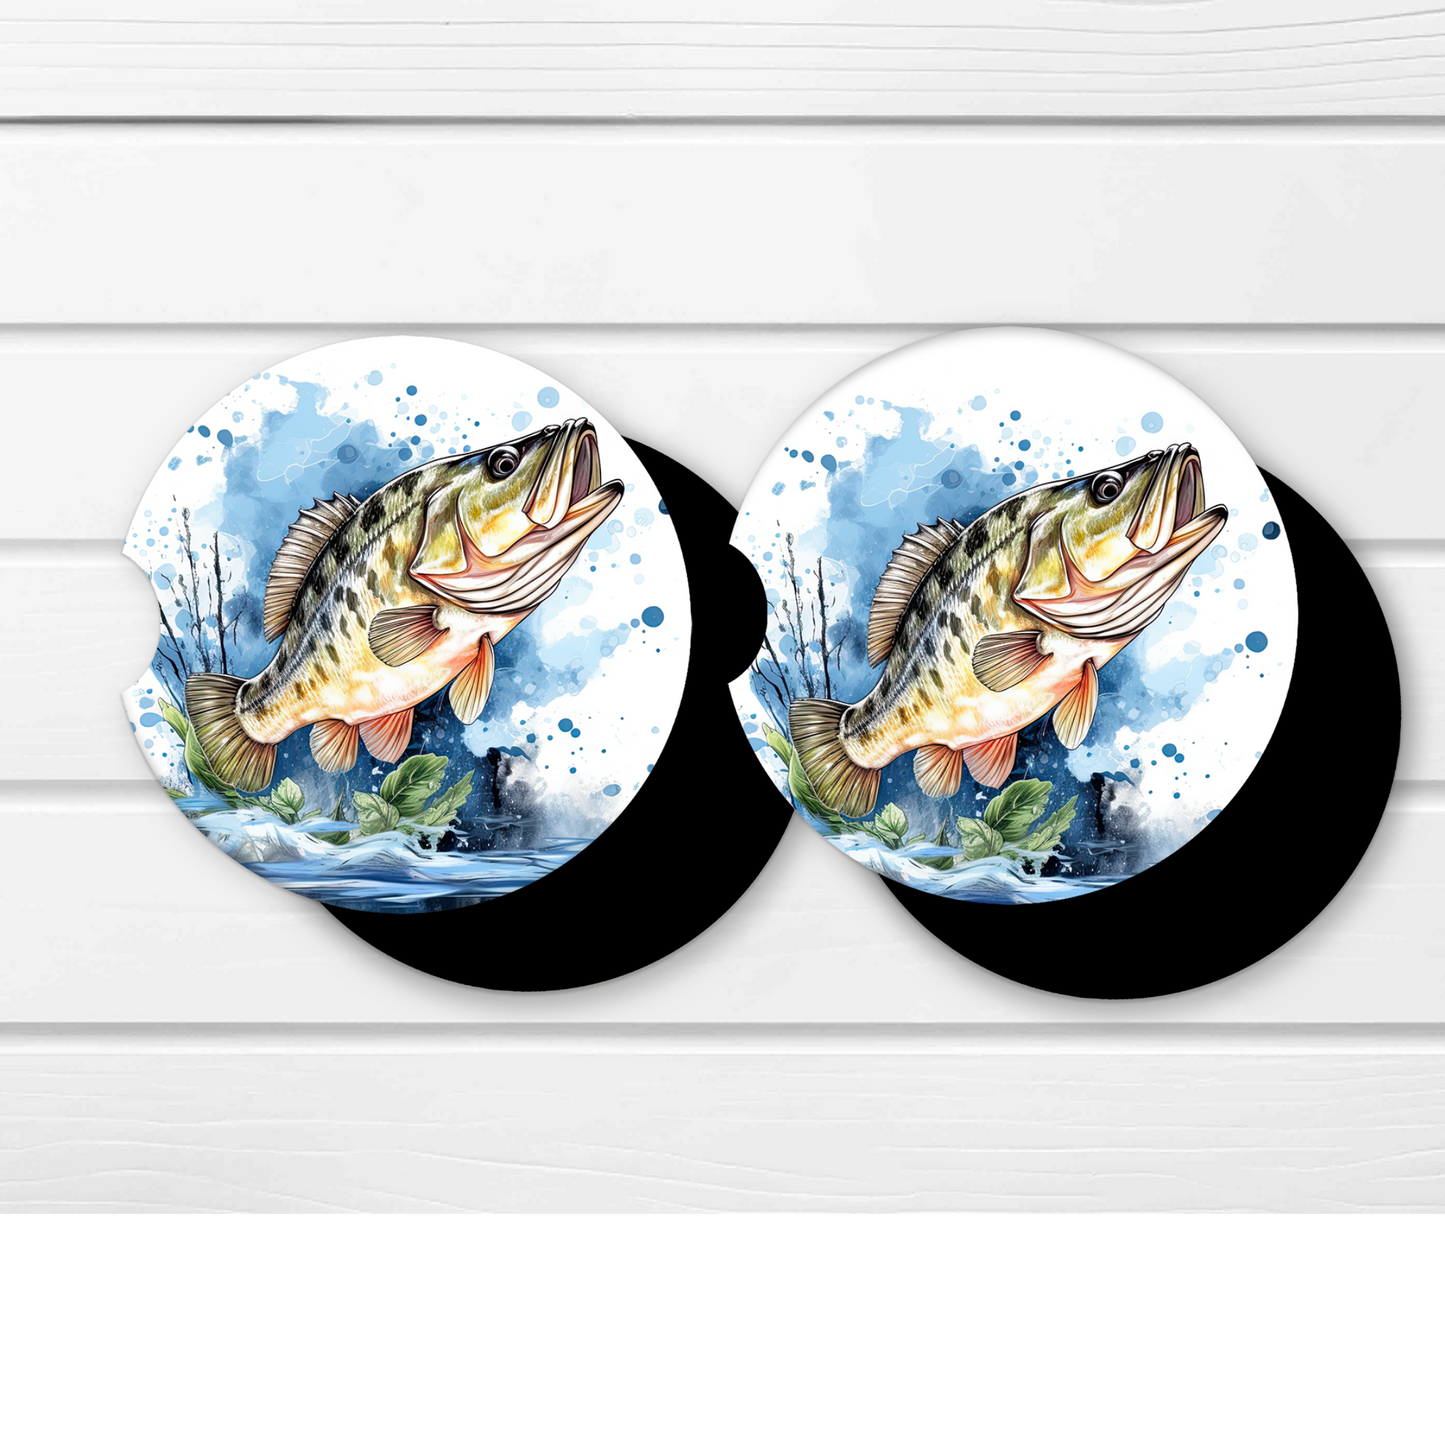 Premium Neoprene Car Coasters | Drink Holders for Your Car Console - Set of 2 Fish Design